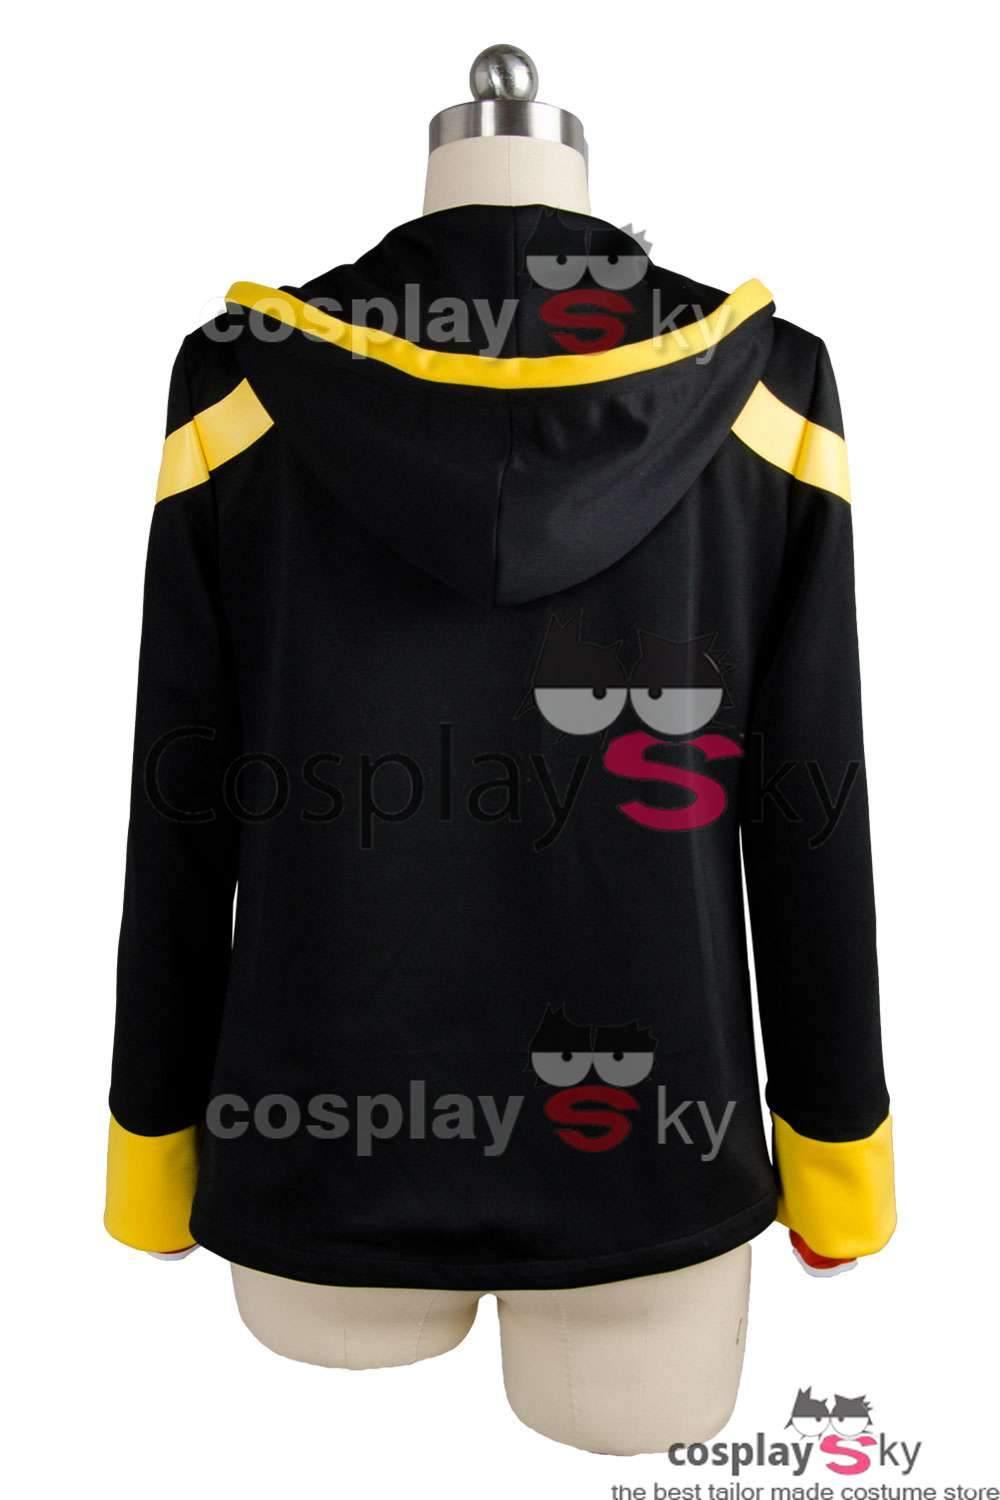 Mystic Messenger 707 EXTREME Saeyoung/Luciel Choi 7 Outfit Cosplay Kostüm - cosplaycartde